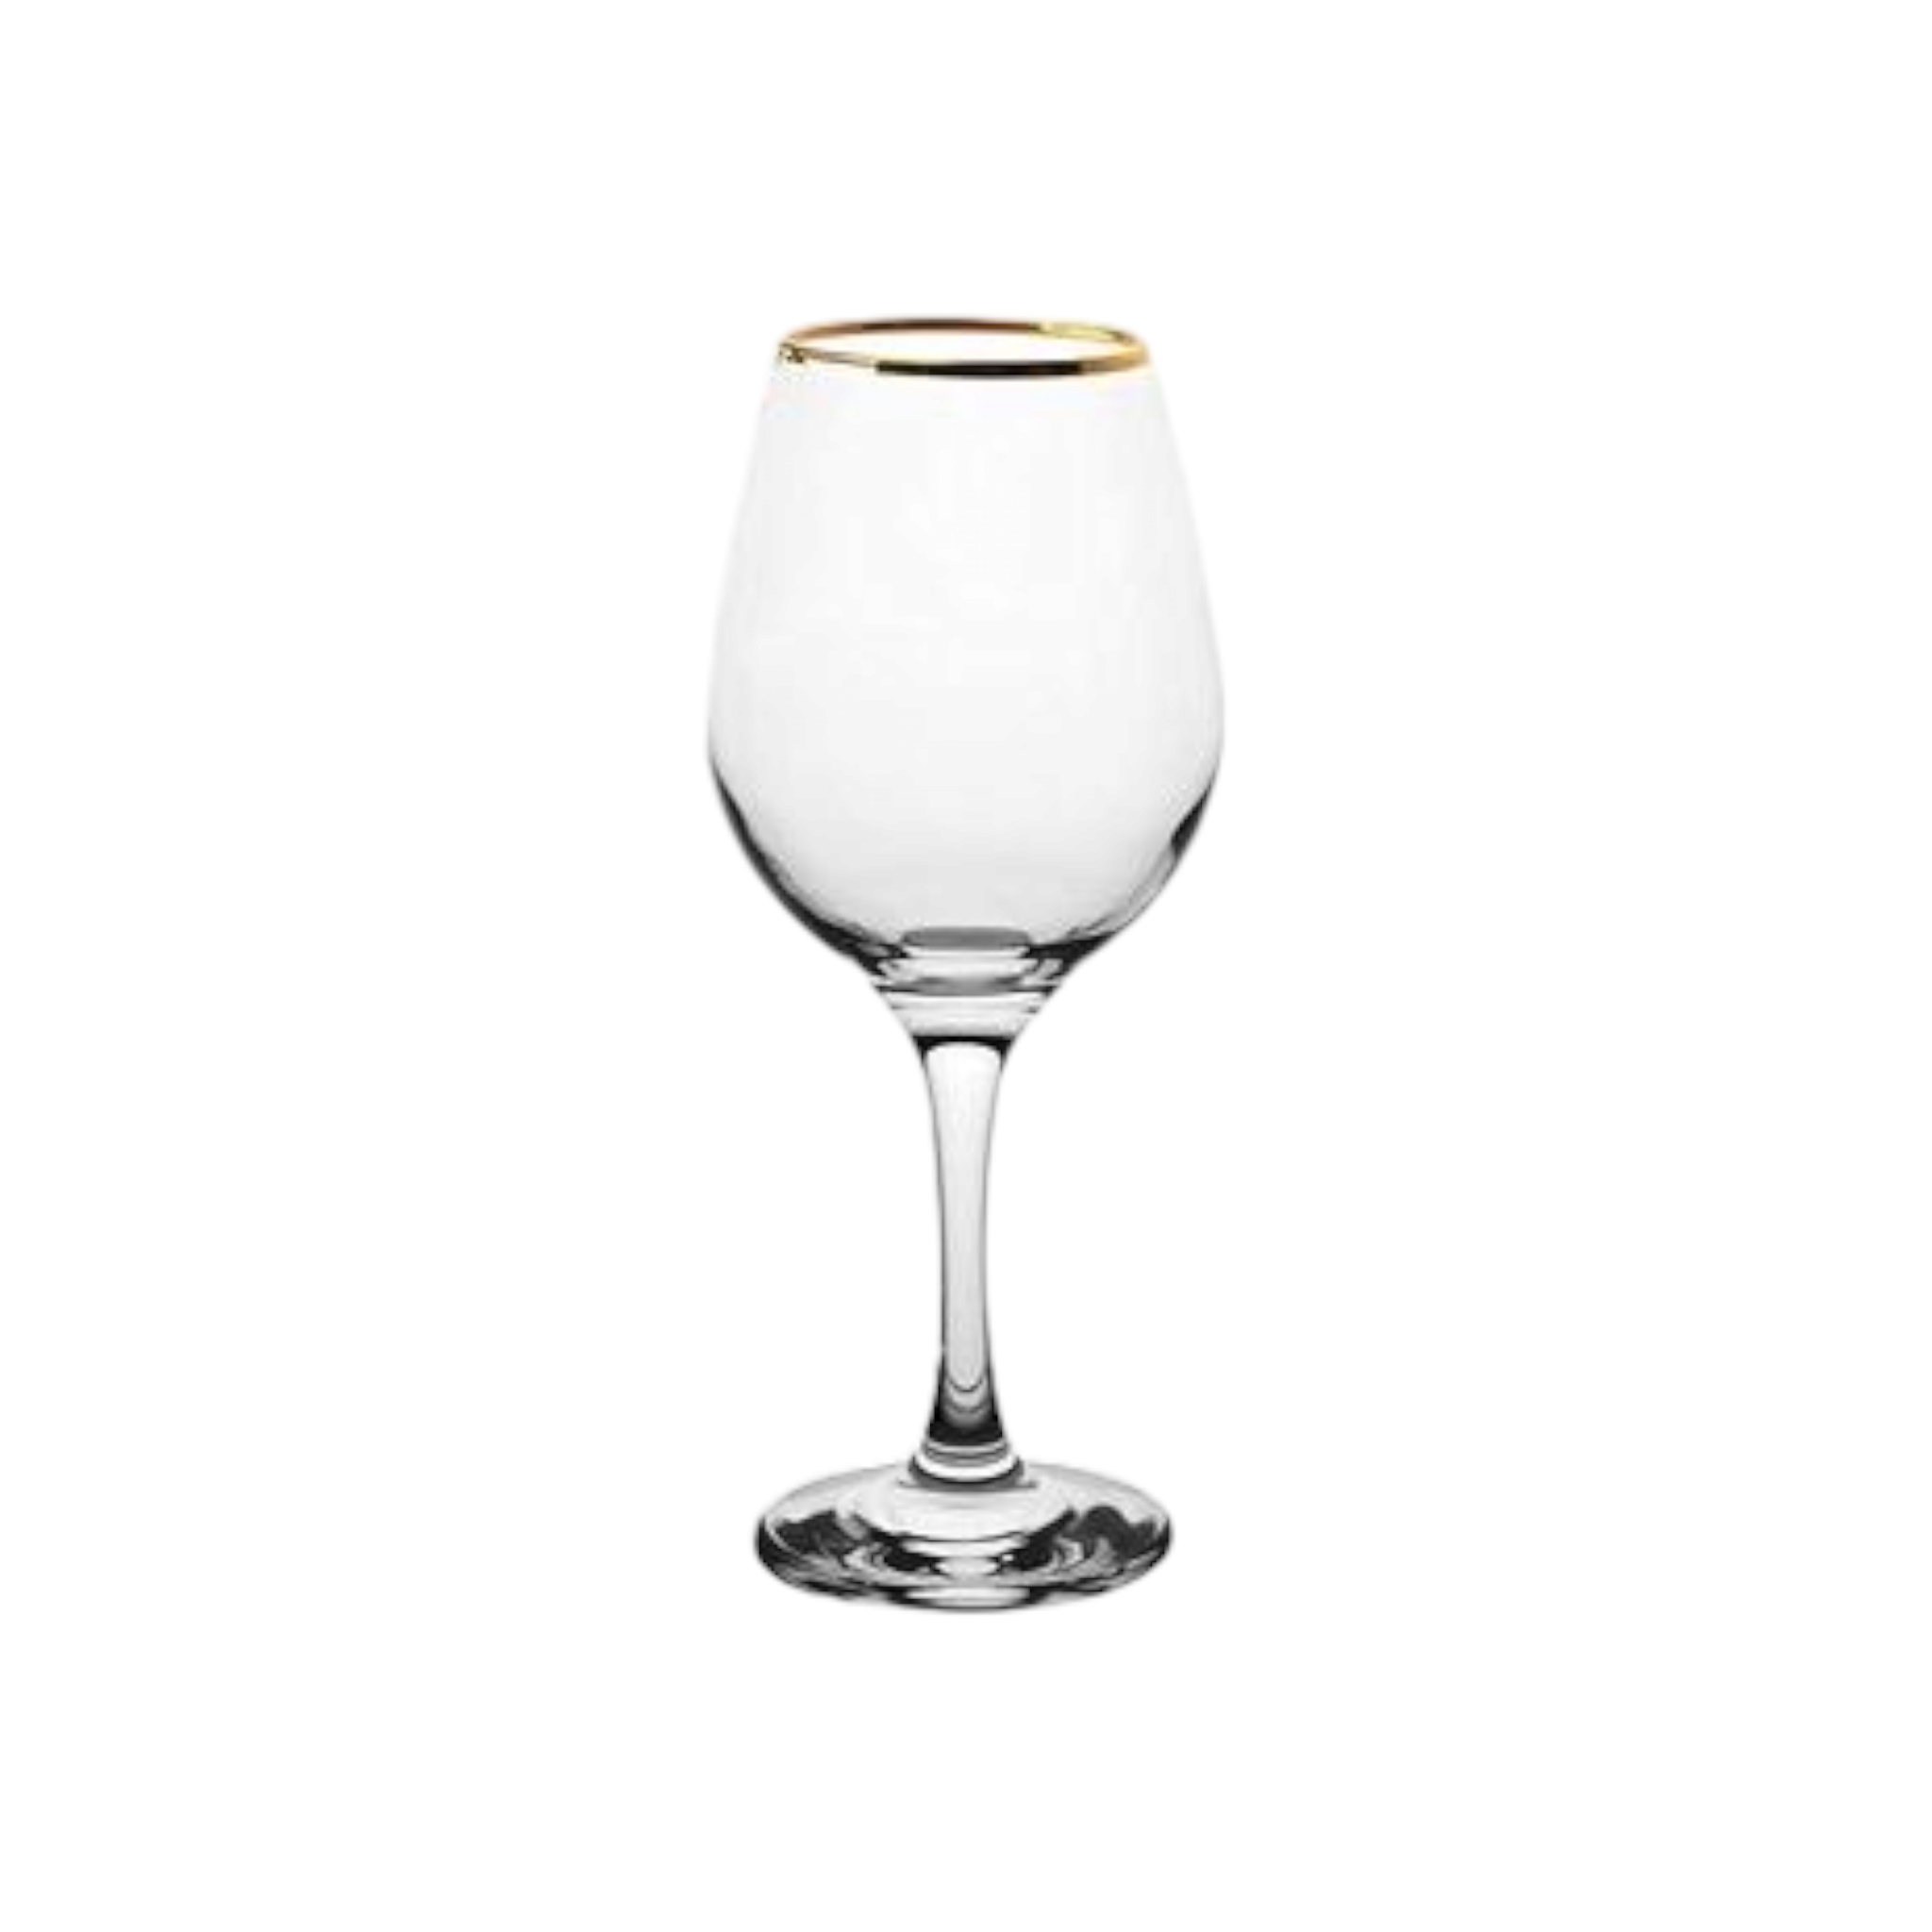 Pasabahce Amber Glass Tumbler 350ml Cocktail with Gold Rim 6pc 23922